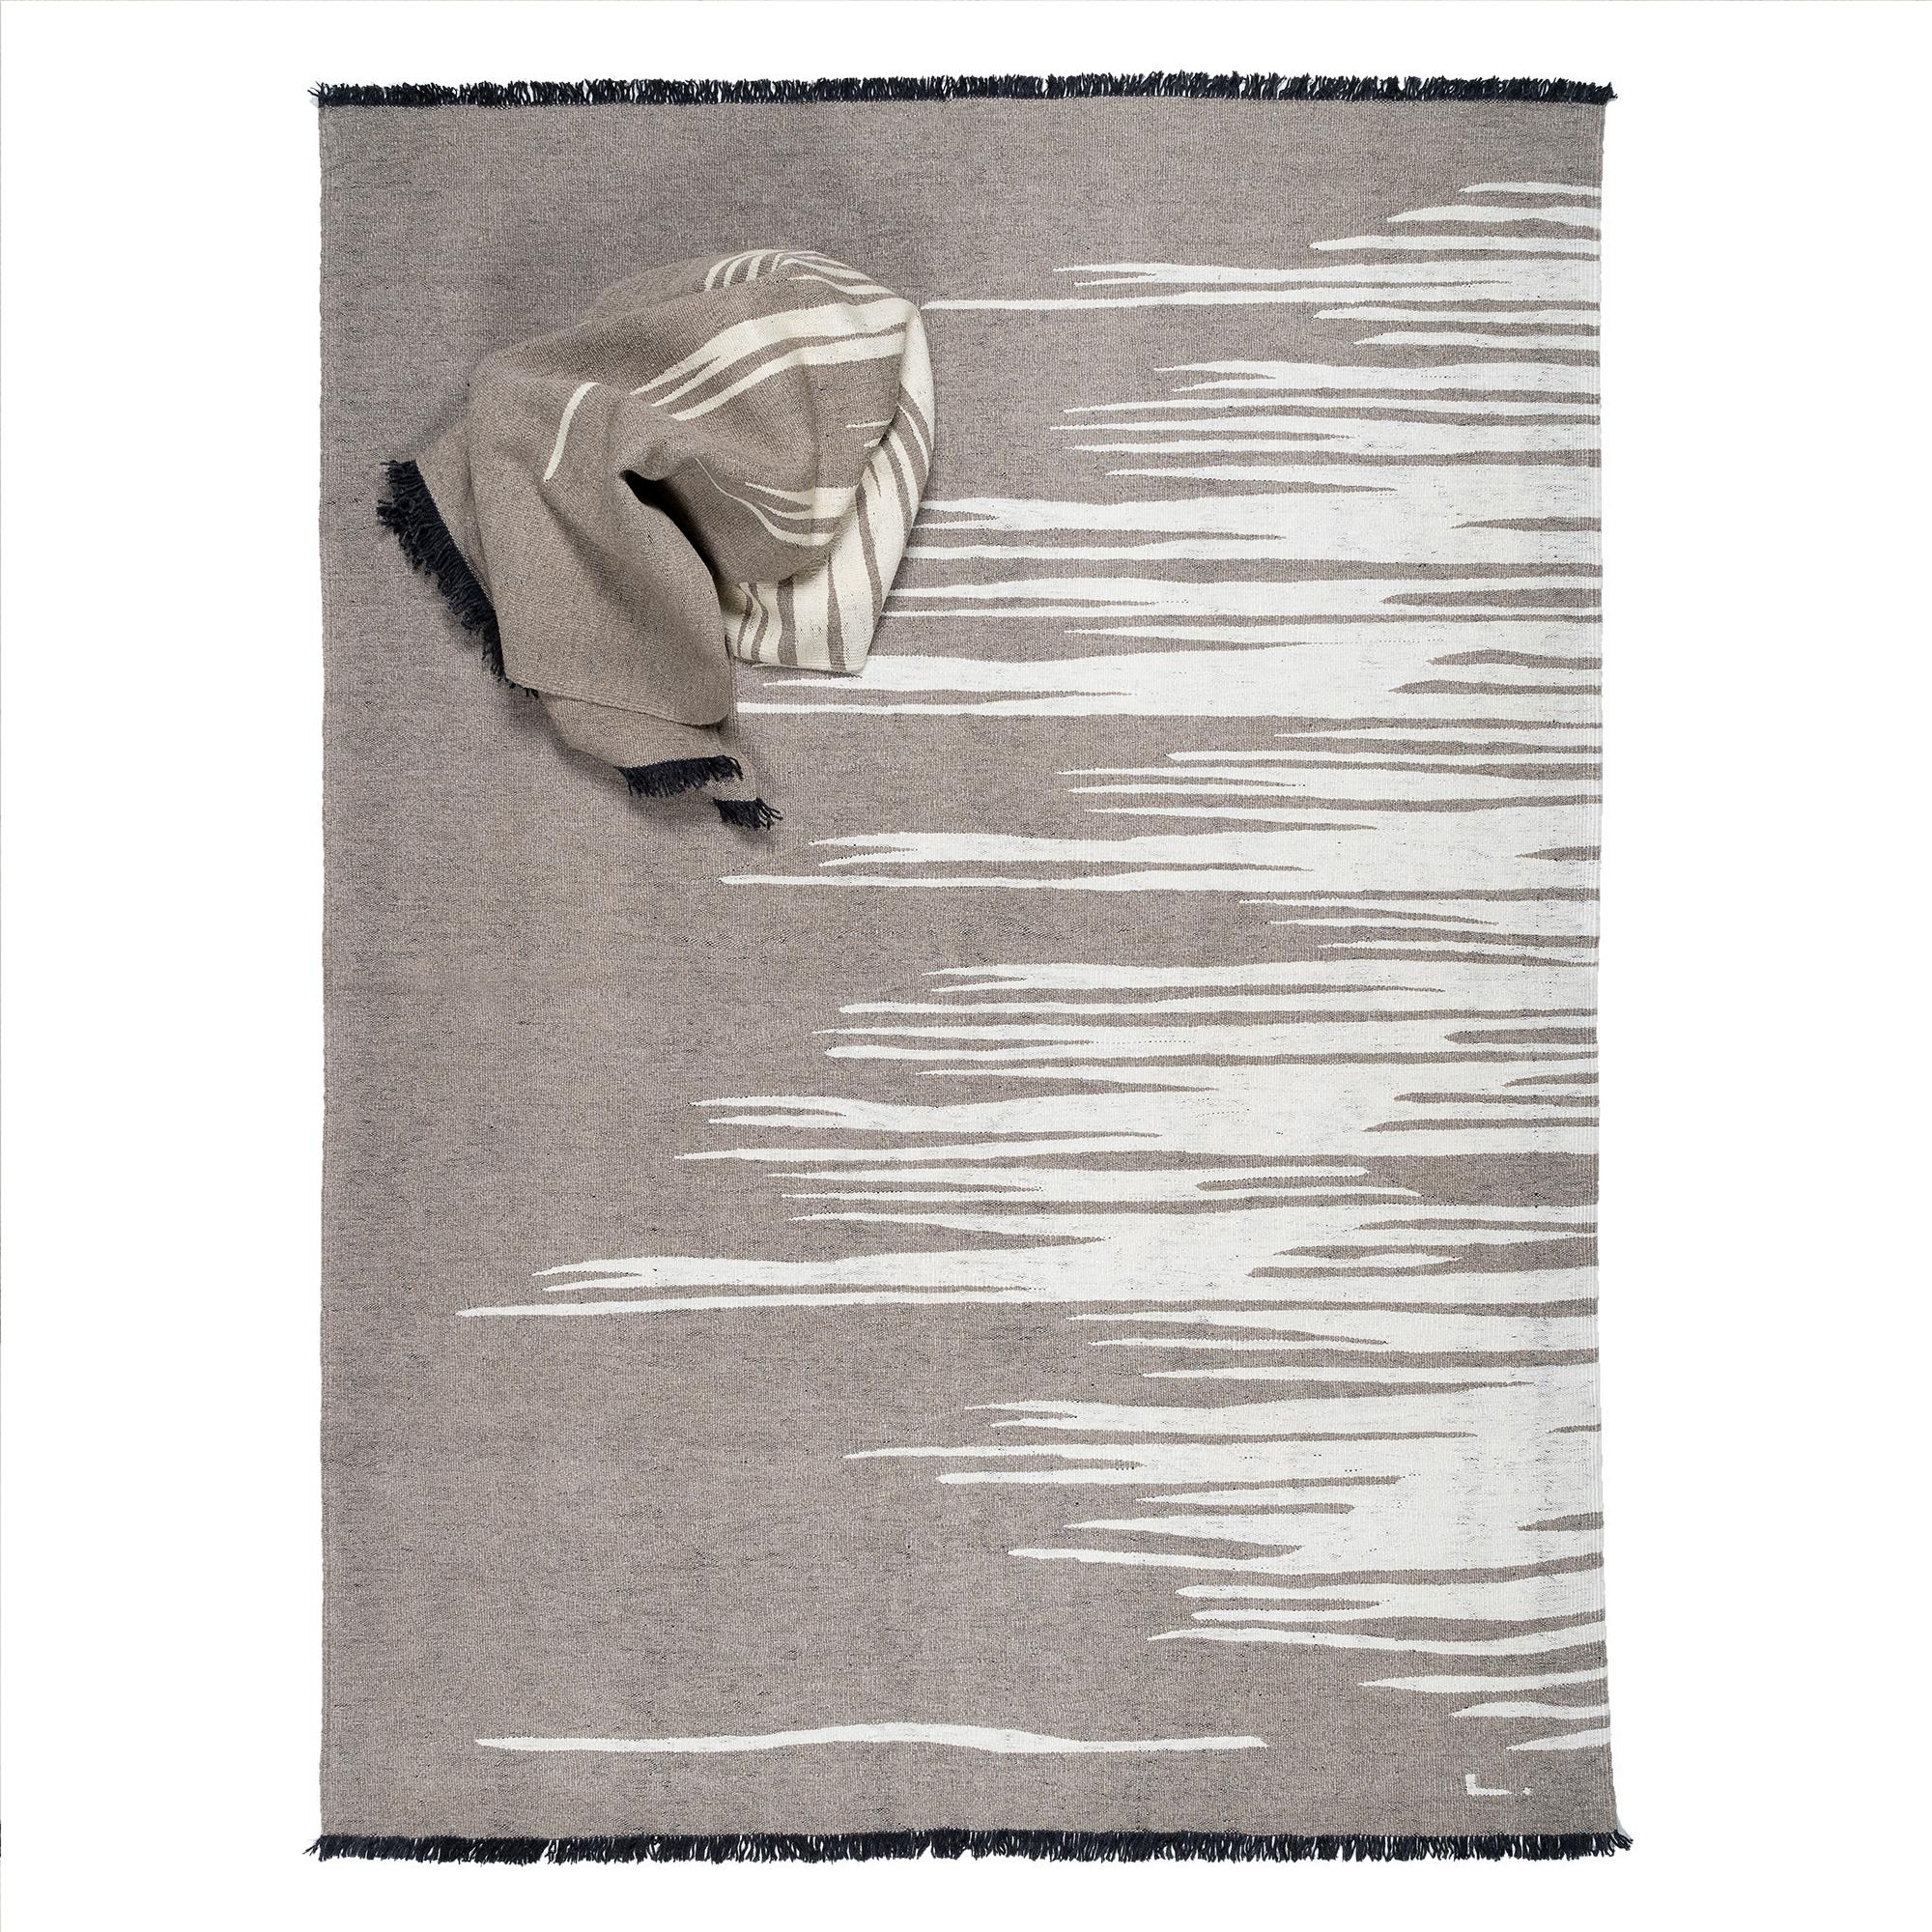 Hand-Woven Handwoven Wool Kilim Rug Ege No 3, Contemporary Earthy Gray and Dune White For Sale